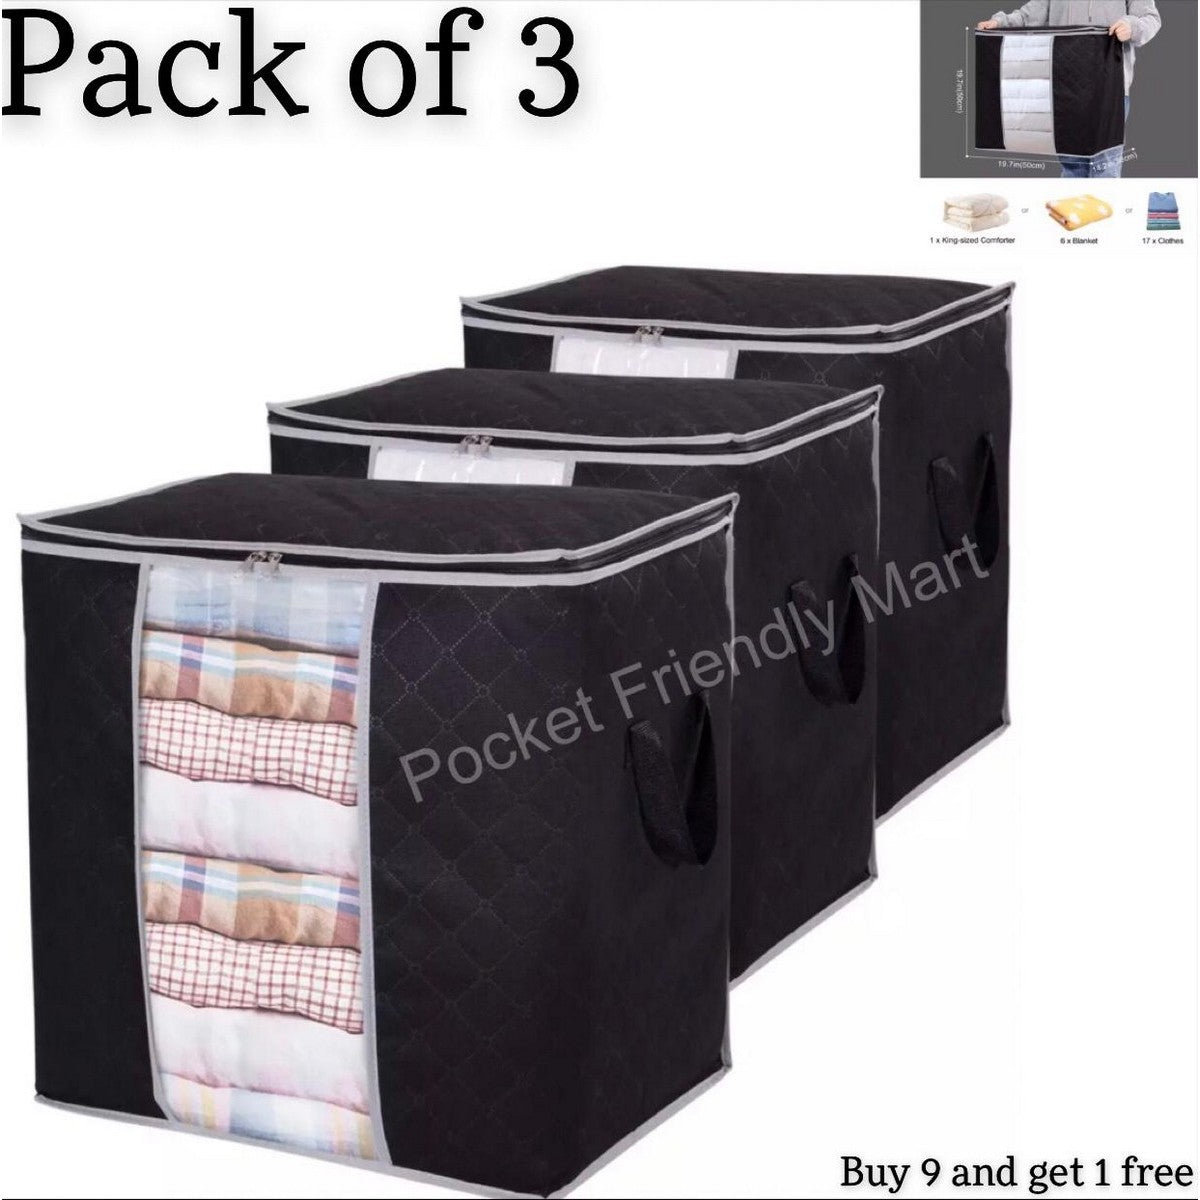 Pack Of 3 - New Waterproof Home Storage Bag foldable non woven Oxford Cloth Bedding Suits Pillows Closet Organizer bags Organizer Zipper Bag